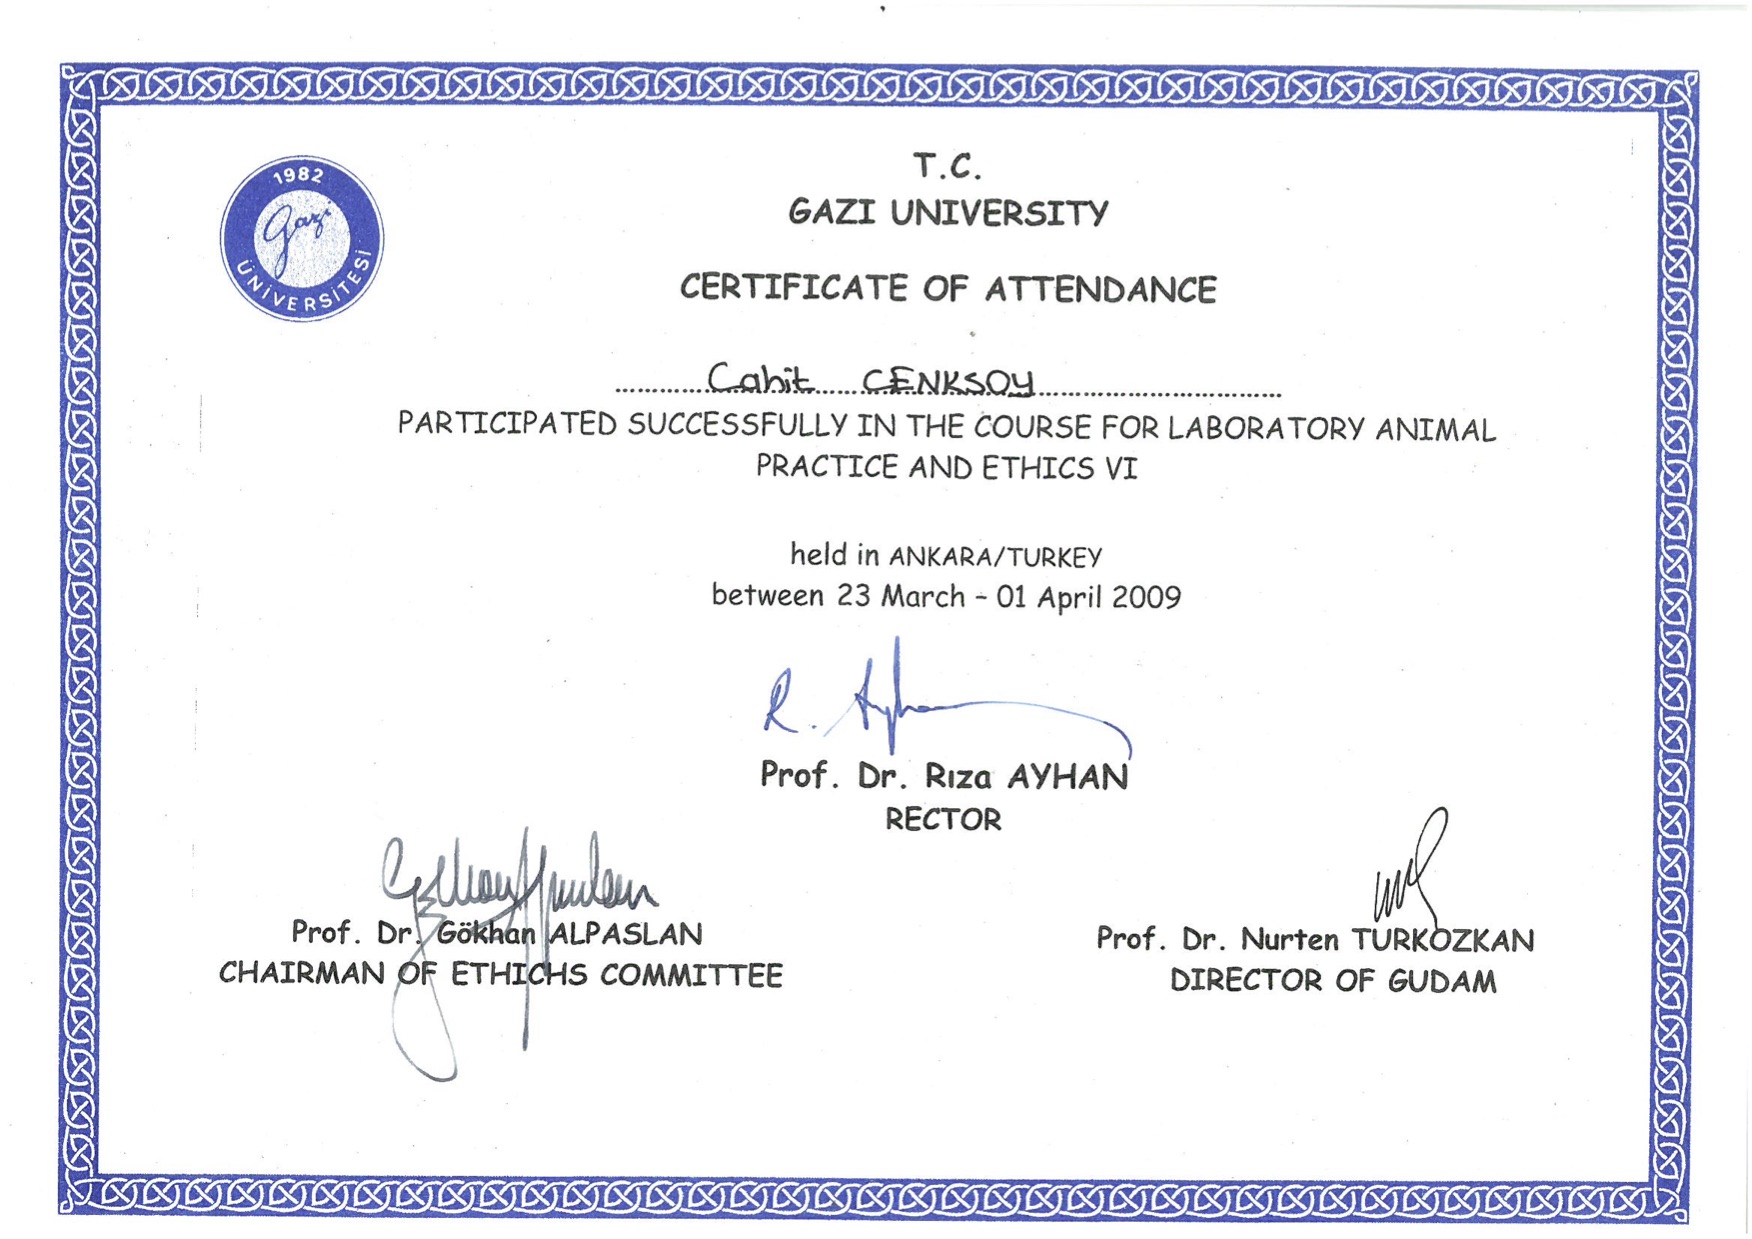 Certificate of Attendance for the course for laboratory animal practice and ethics 6